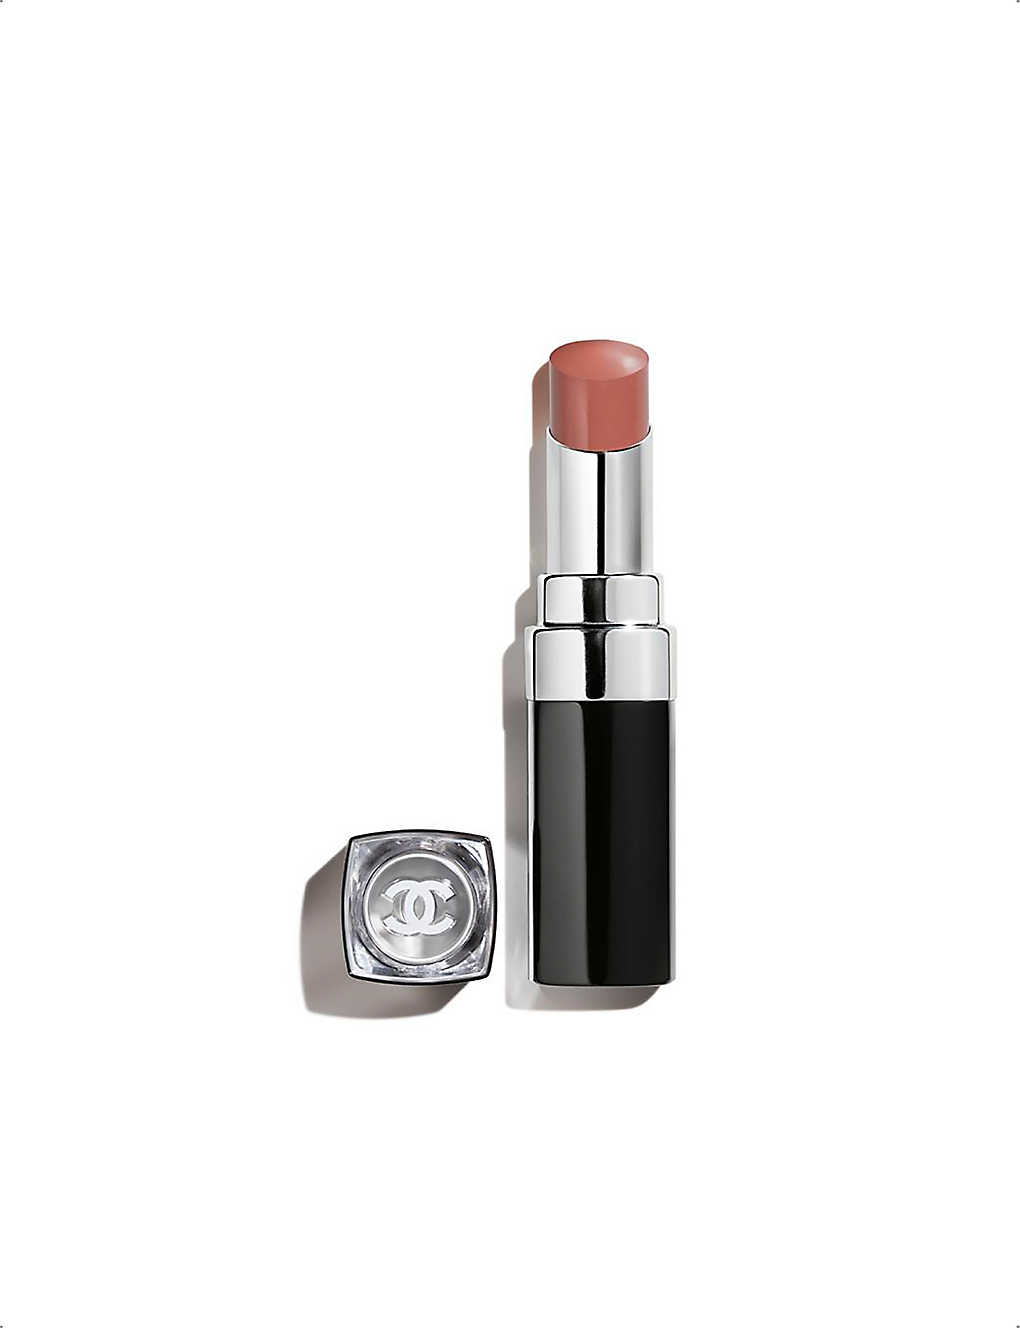 CHANEL Rouge Coco Flash Colour, Shine, Intensity In A Flash, 144